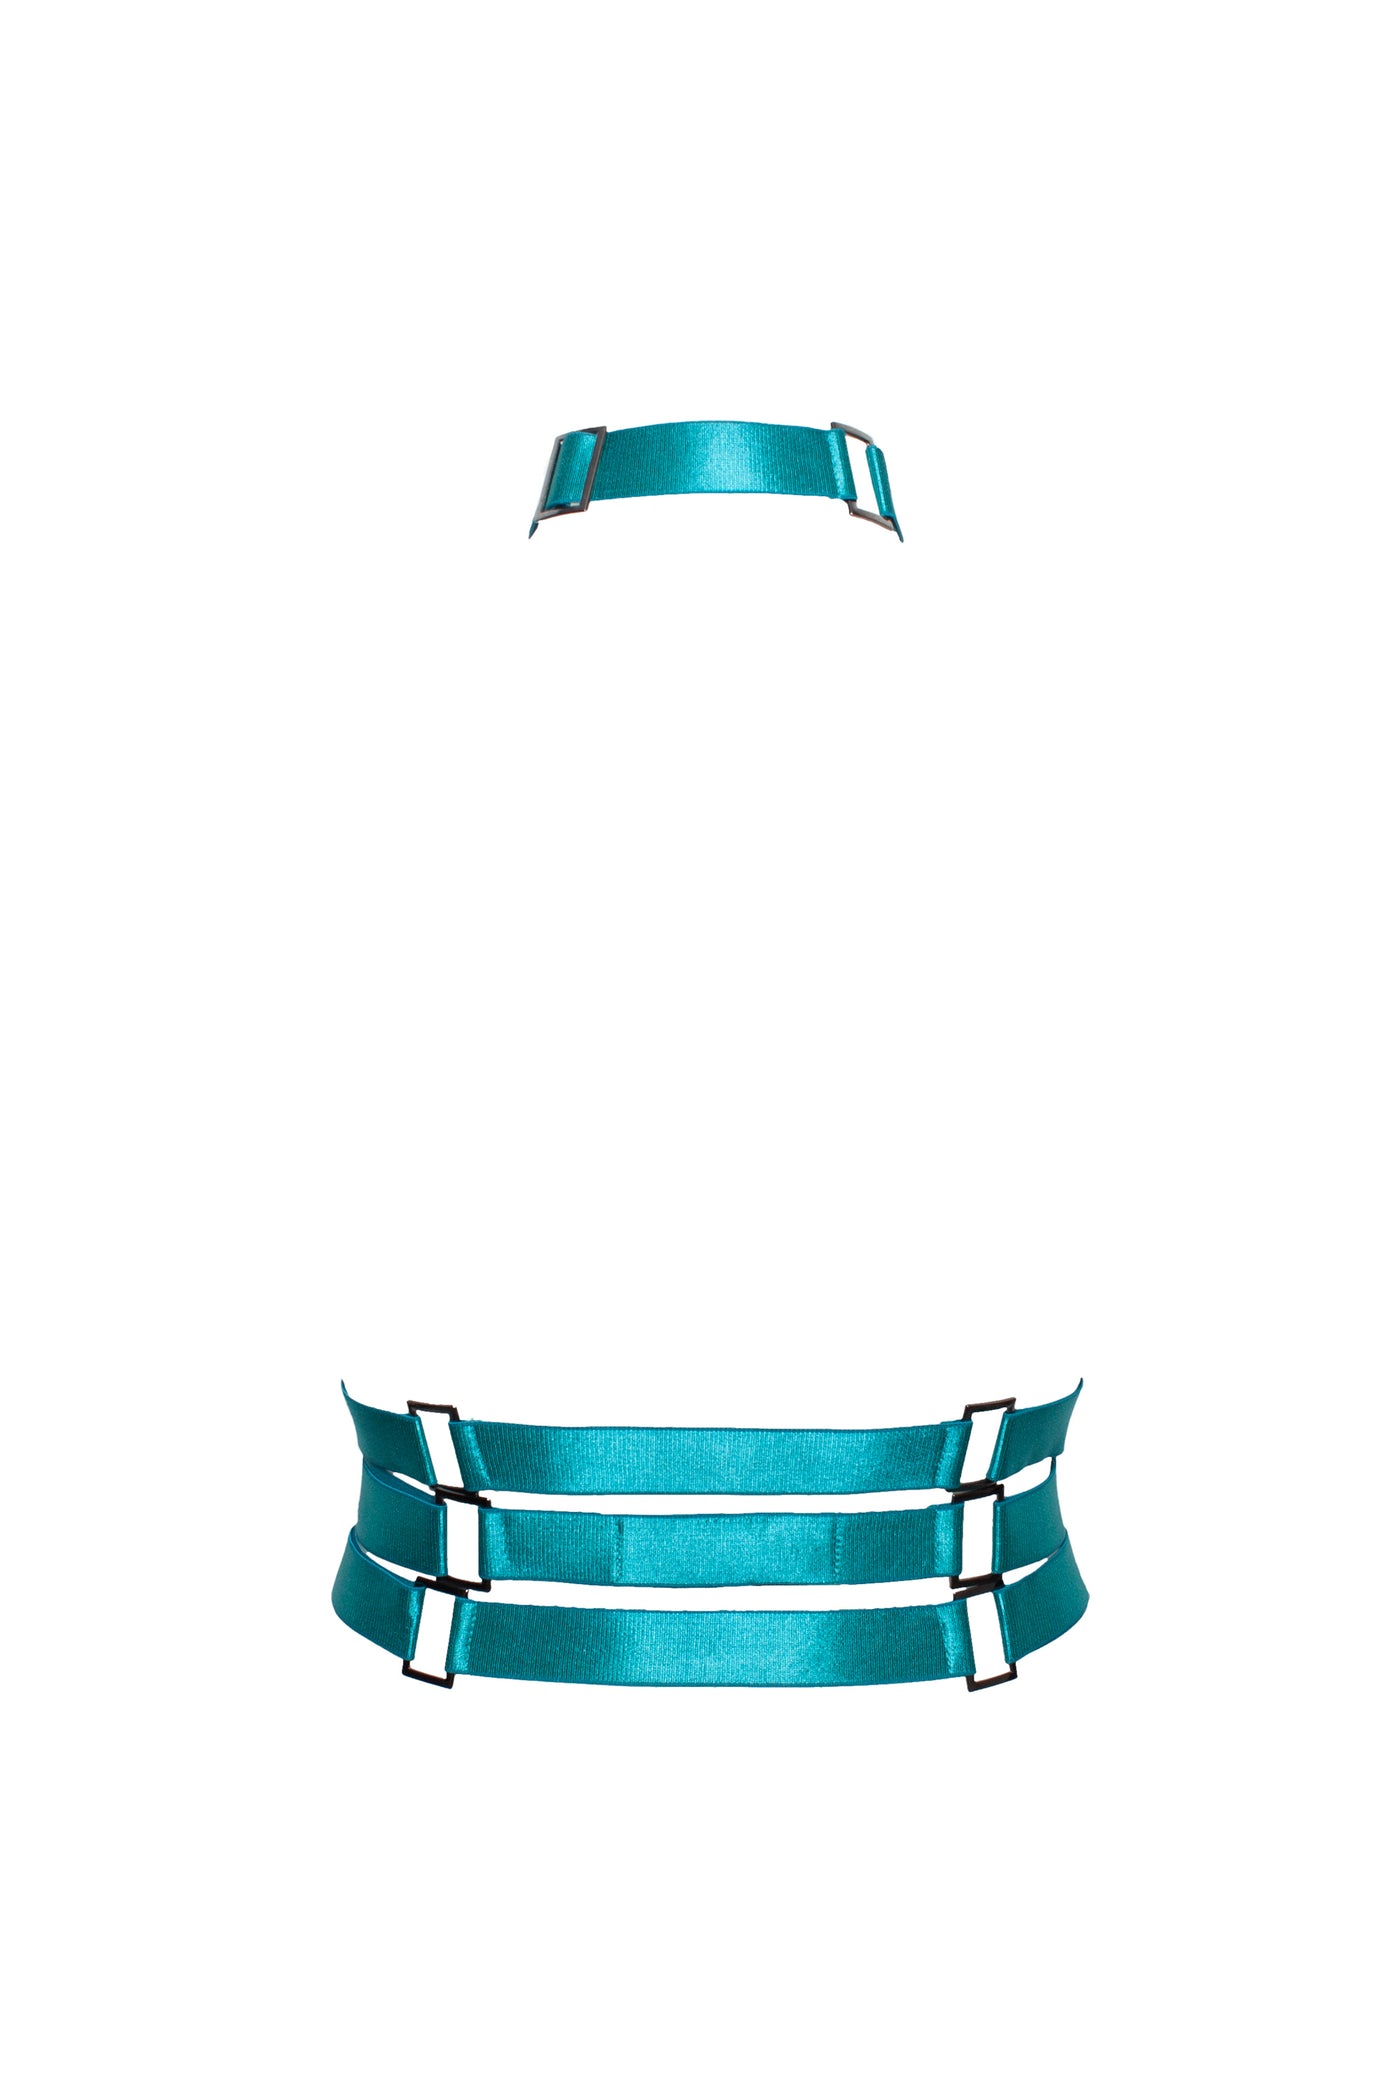 Siren Caged Bust Harness (Teal)